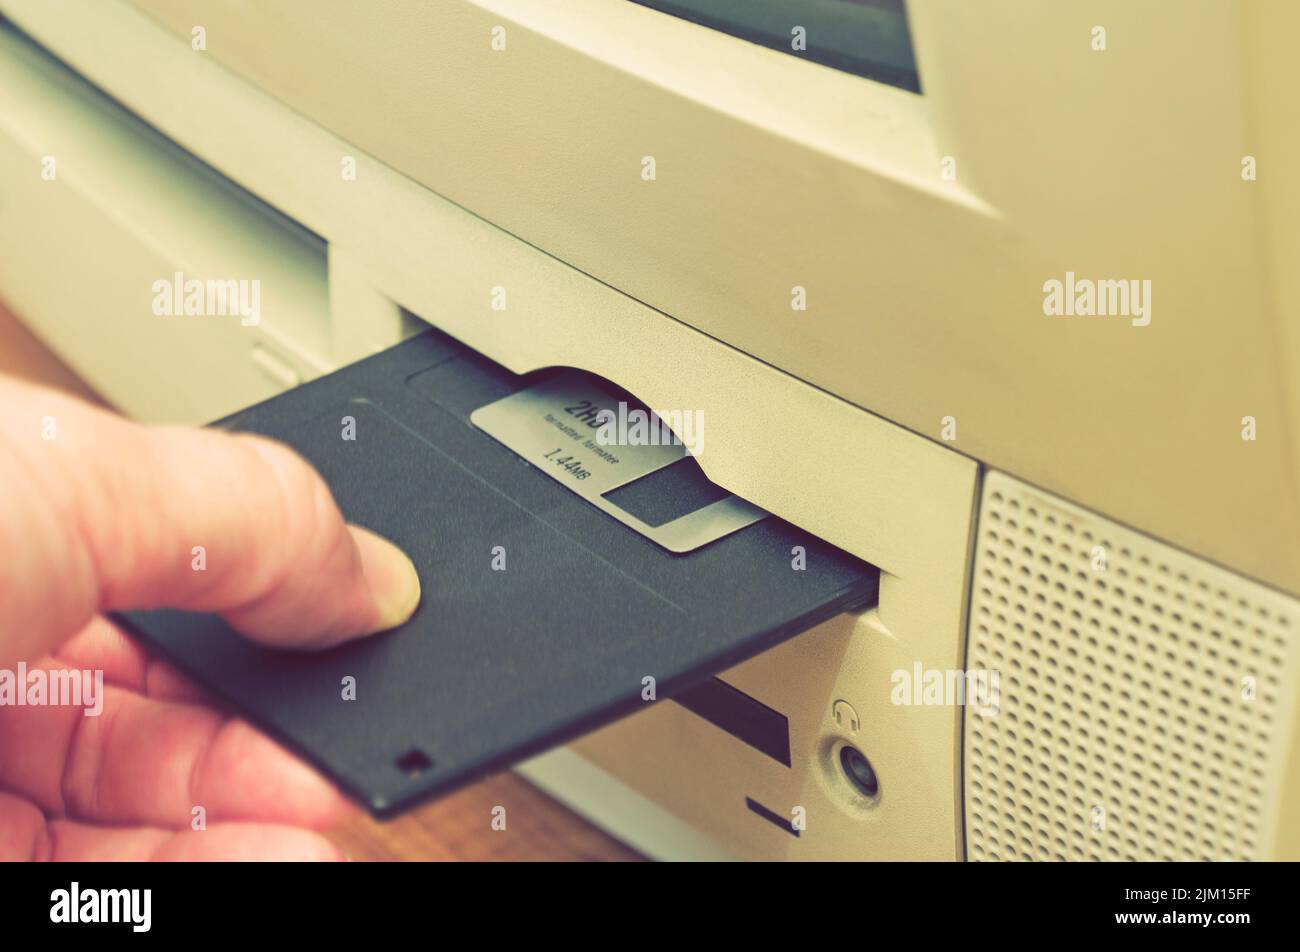 loading a floppy disk into disk drive Stock Photo